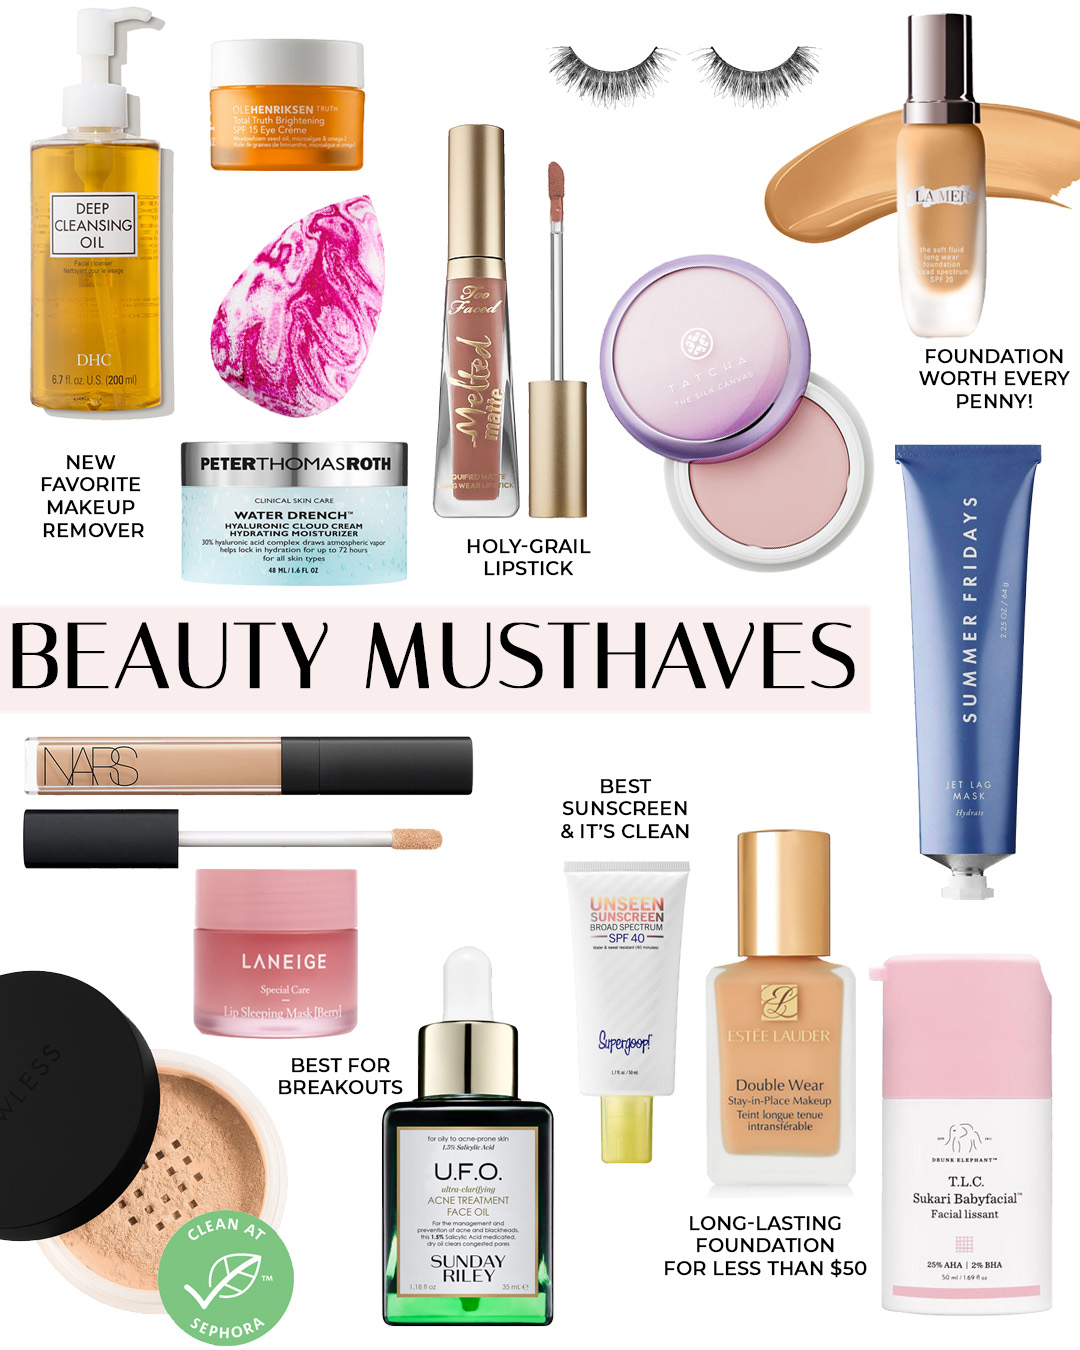 My Beauty Must-Haves 2019 - Color & Chic